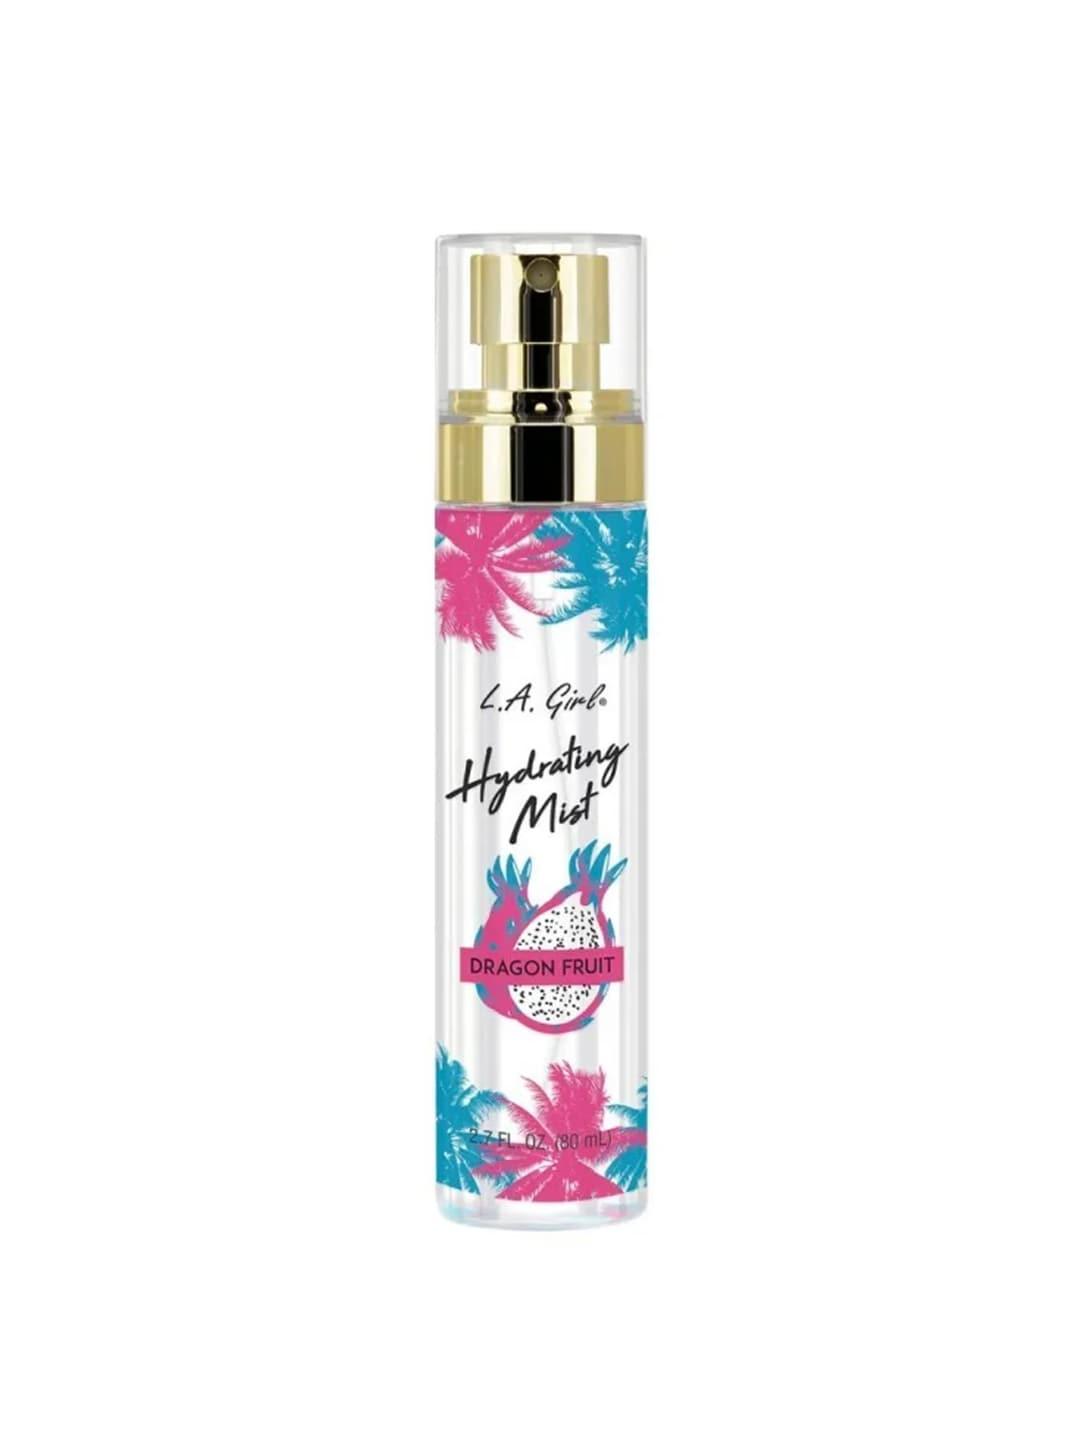 l.a-girl-lightweight-hydrating-face-mist-primer-spray-with-rose-water-80-ml---dragon-fruit